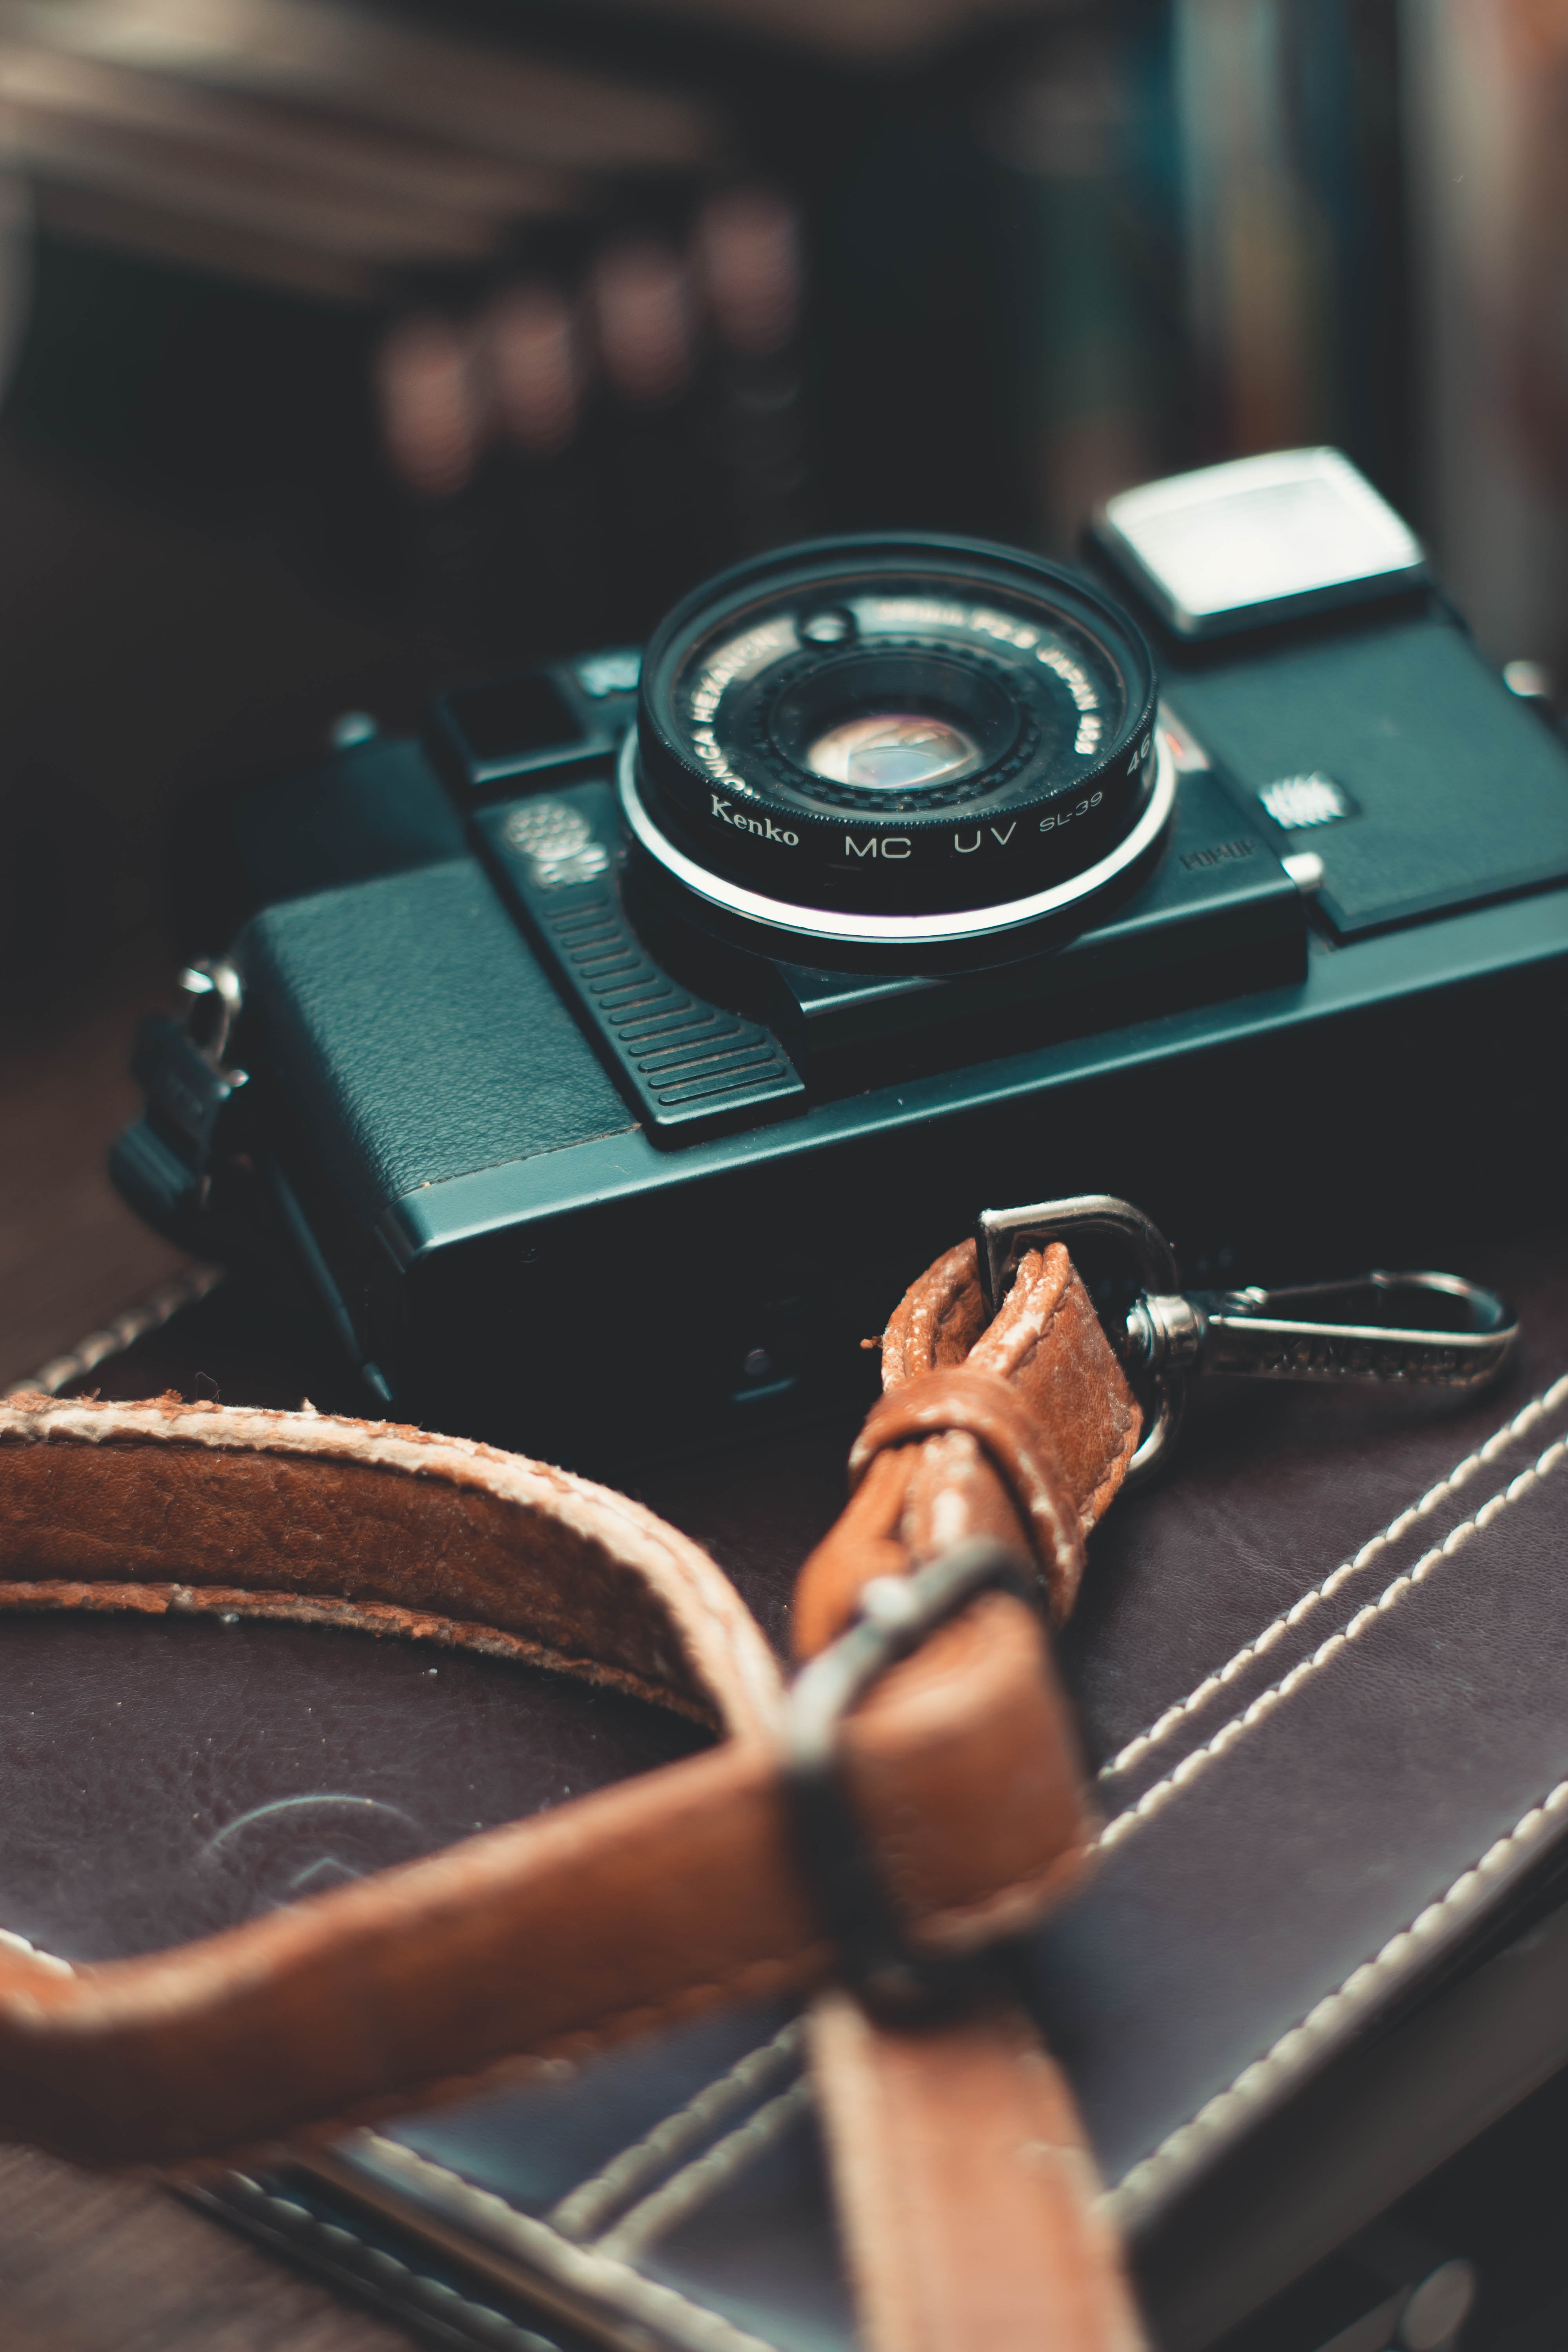 Best Free Old Camera & Image · 100% Royalty Free HD Downloads